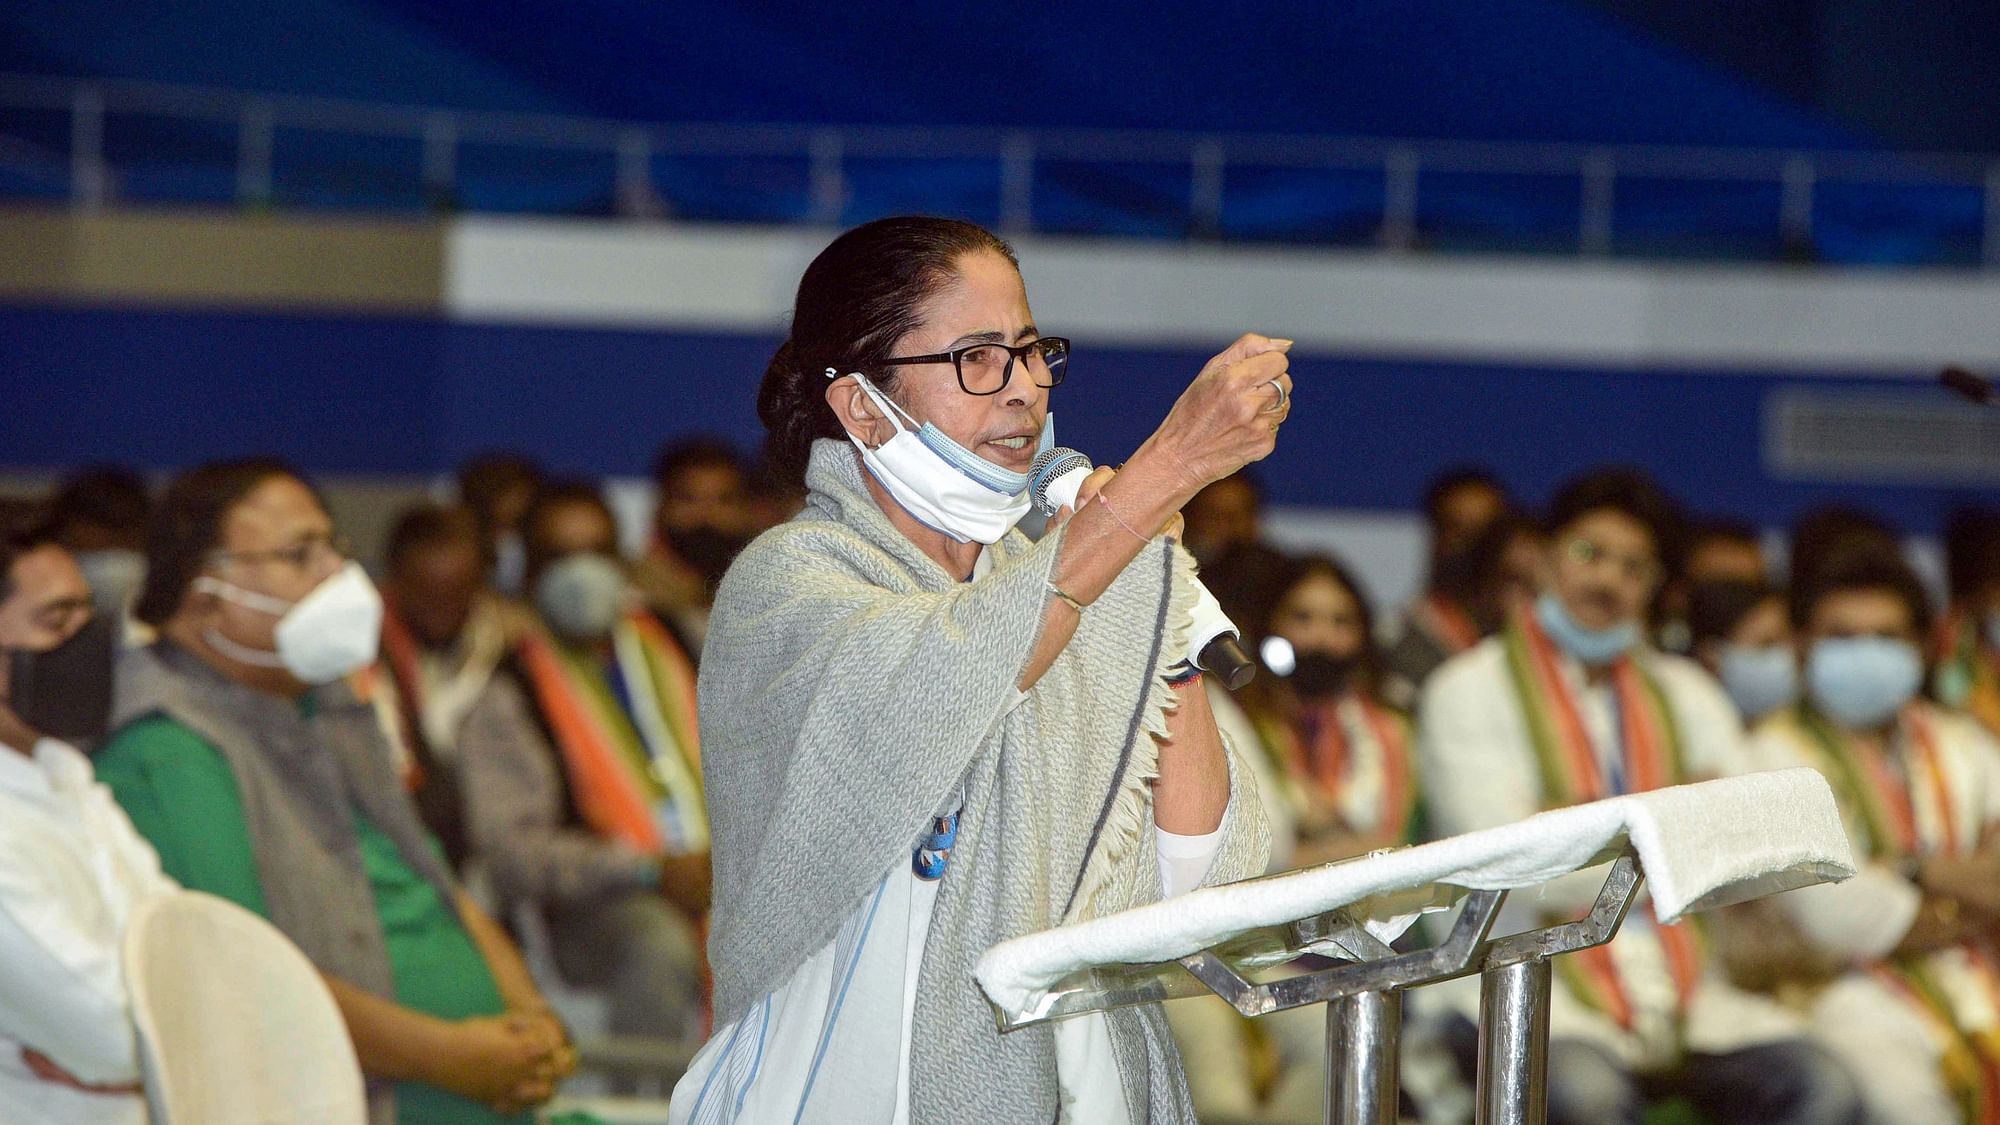 <div class="paragraphs"><p>Calling the Bharatiya Janata Party (BJP) rule in India worse than that of Adolf Hitler, Joseph Stalin or Benito Mussolini, <a href="https://www.thequint.com/news/india/situation-in-country-not-finekeep-fighting-mamata-banerjees-eid-message">West Bengal Chief Minister Mamata Banerjee</a>, on Monday, 23 May, said the saffron party-led dispensation was bulldozing the federal structure of the country. (File photo)</p></div>